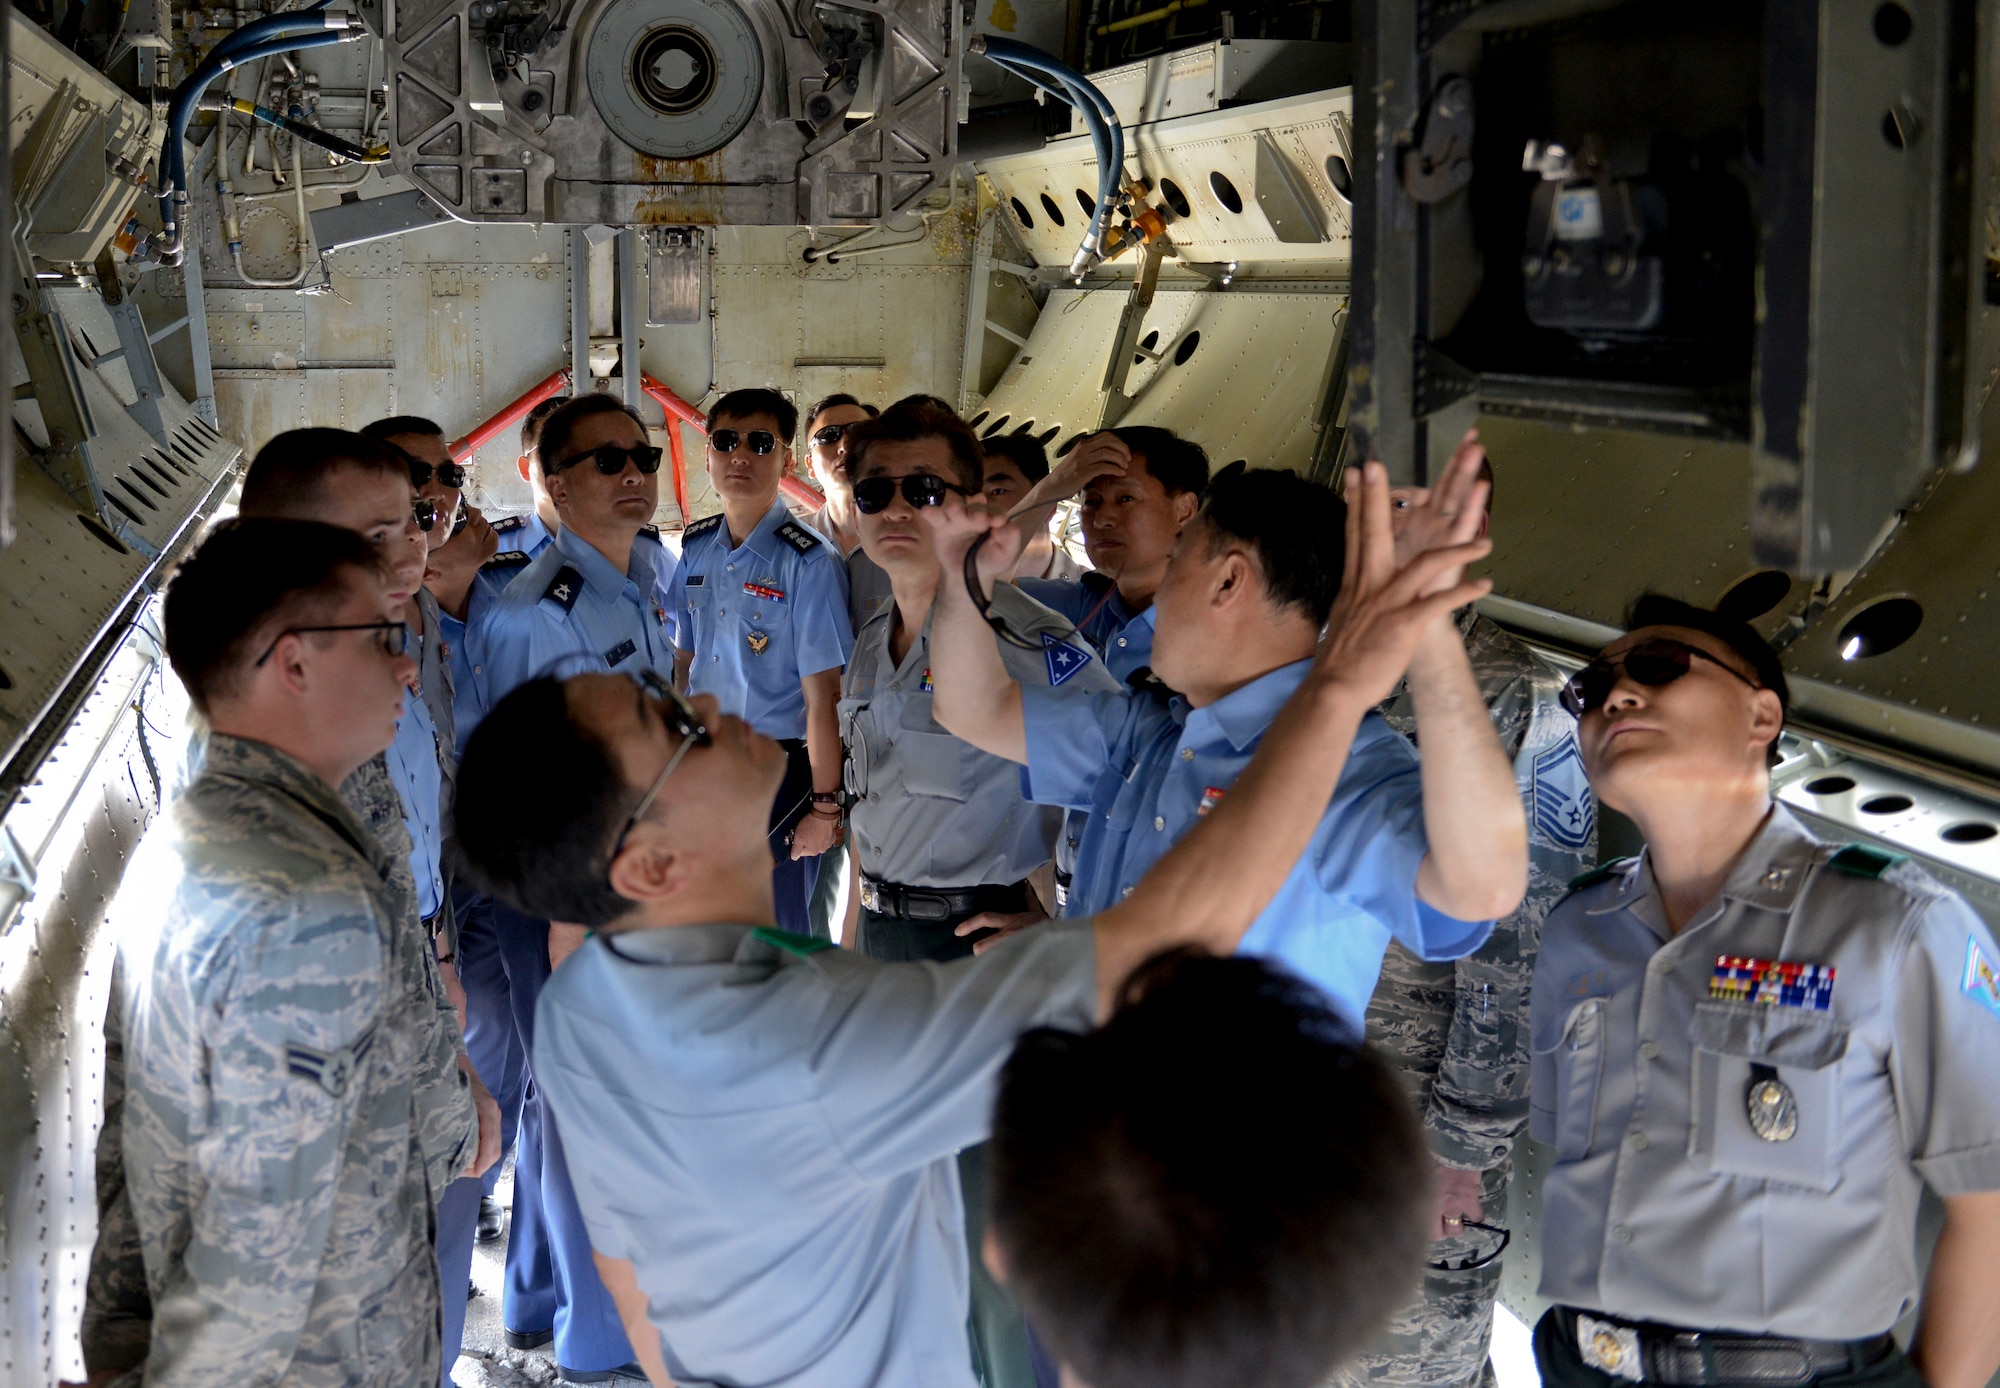 A group of Republic of Korea generals and admirals observe a B-52 Stratofortress bomb bay Jan. 30, 2015, at Andersen Air Force Base, Guam, as part of a Korea National Defense University capstone event. The course, which is designed for newly appointed flag officers, educates participants on key issues and capabilities of allied nations in the Pacific. (U.S. Air Force photo by Staff Sgt. Robert Hicks/Released)